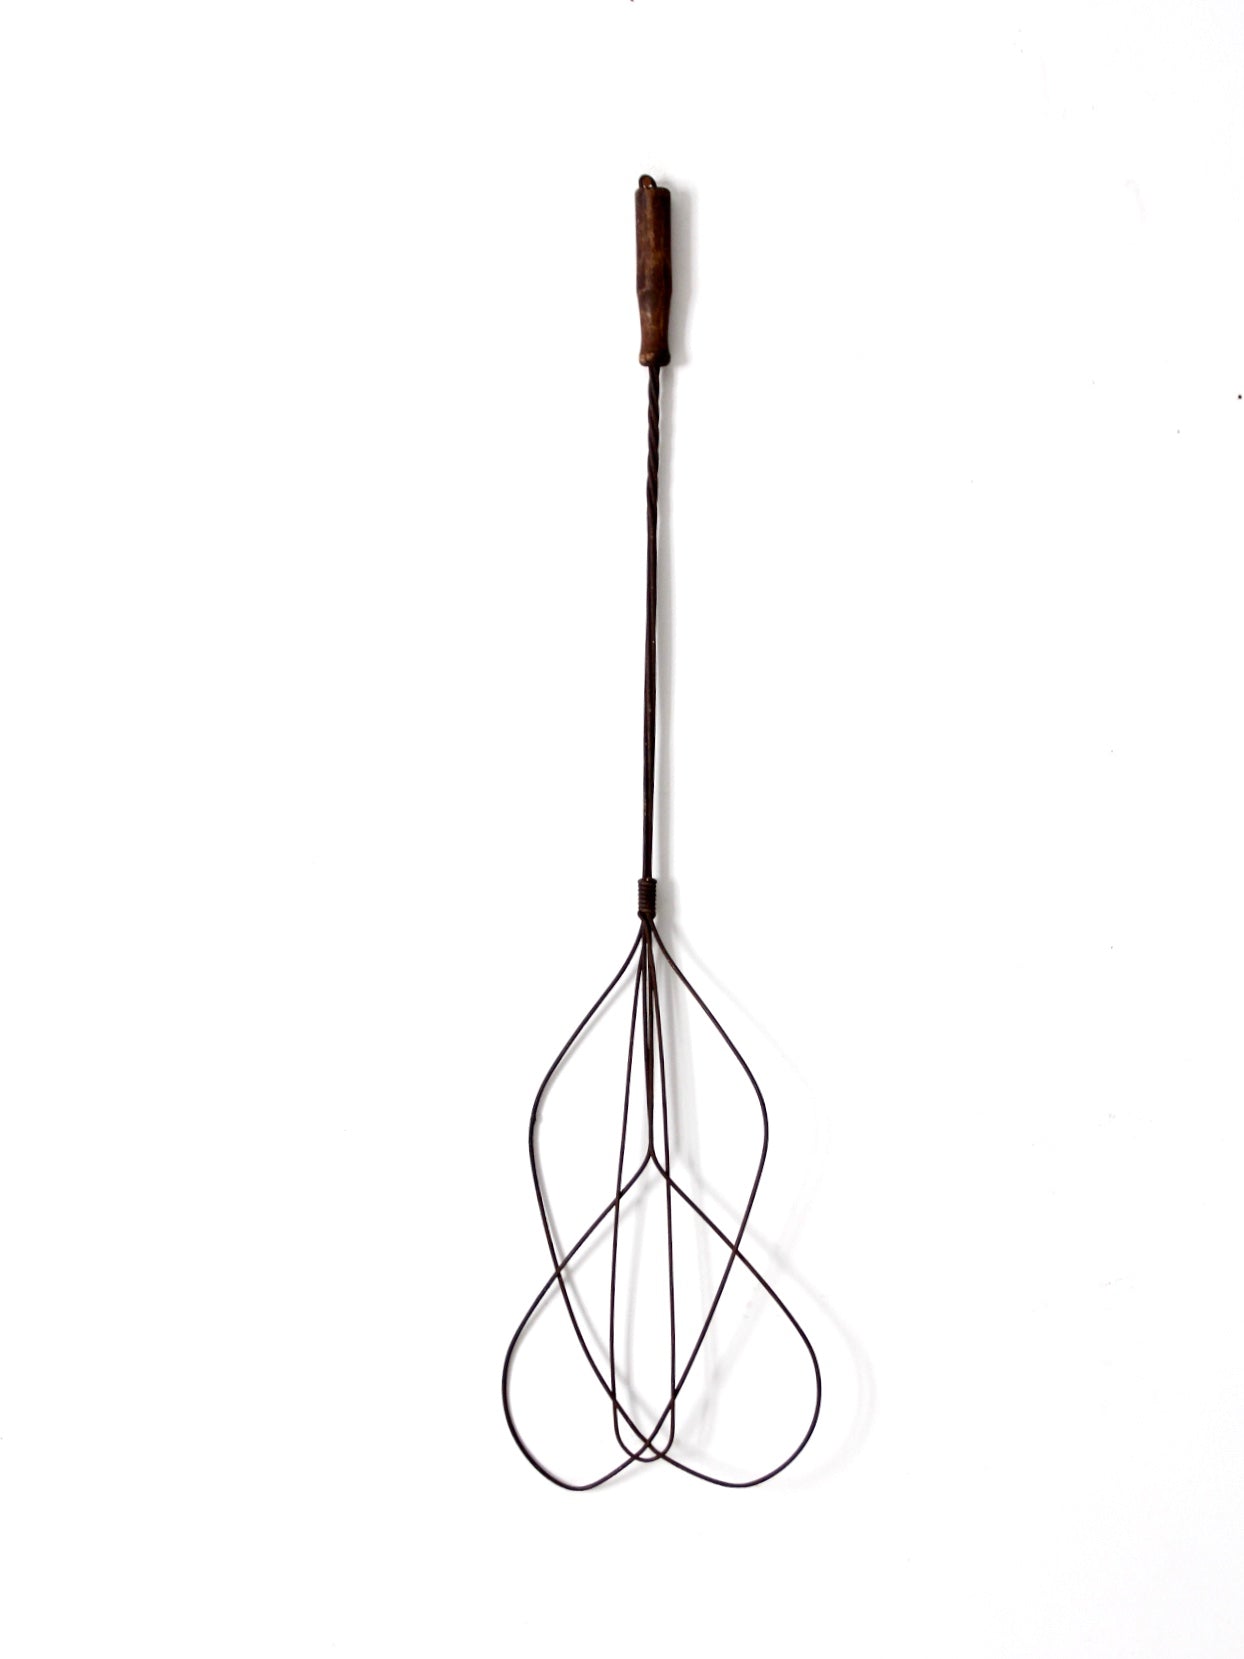 Antique Rug Beater - Sherwood Auctions